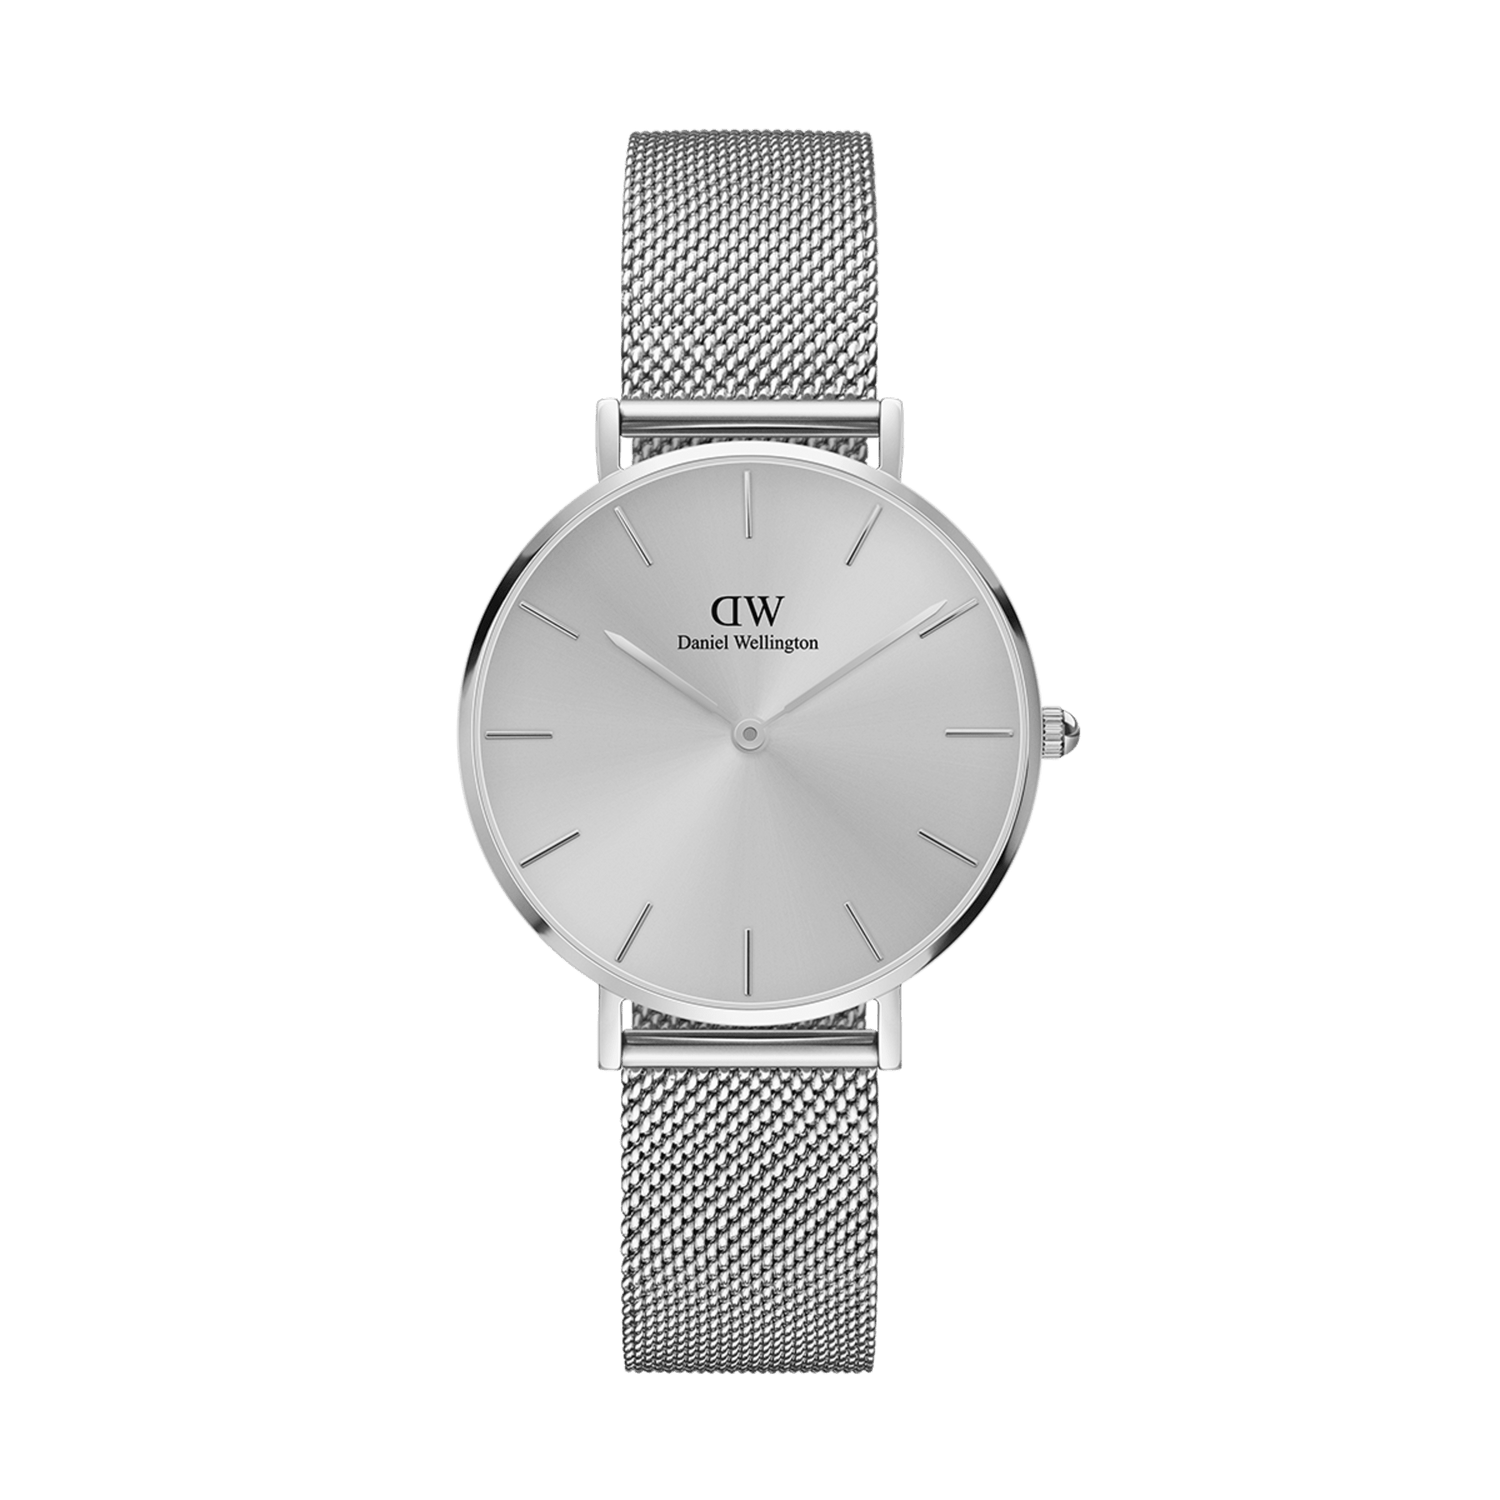 Silver watches - Women and men's watches in silver | DW